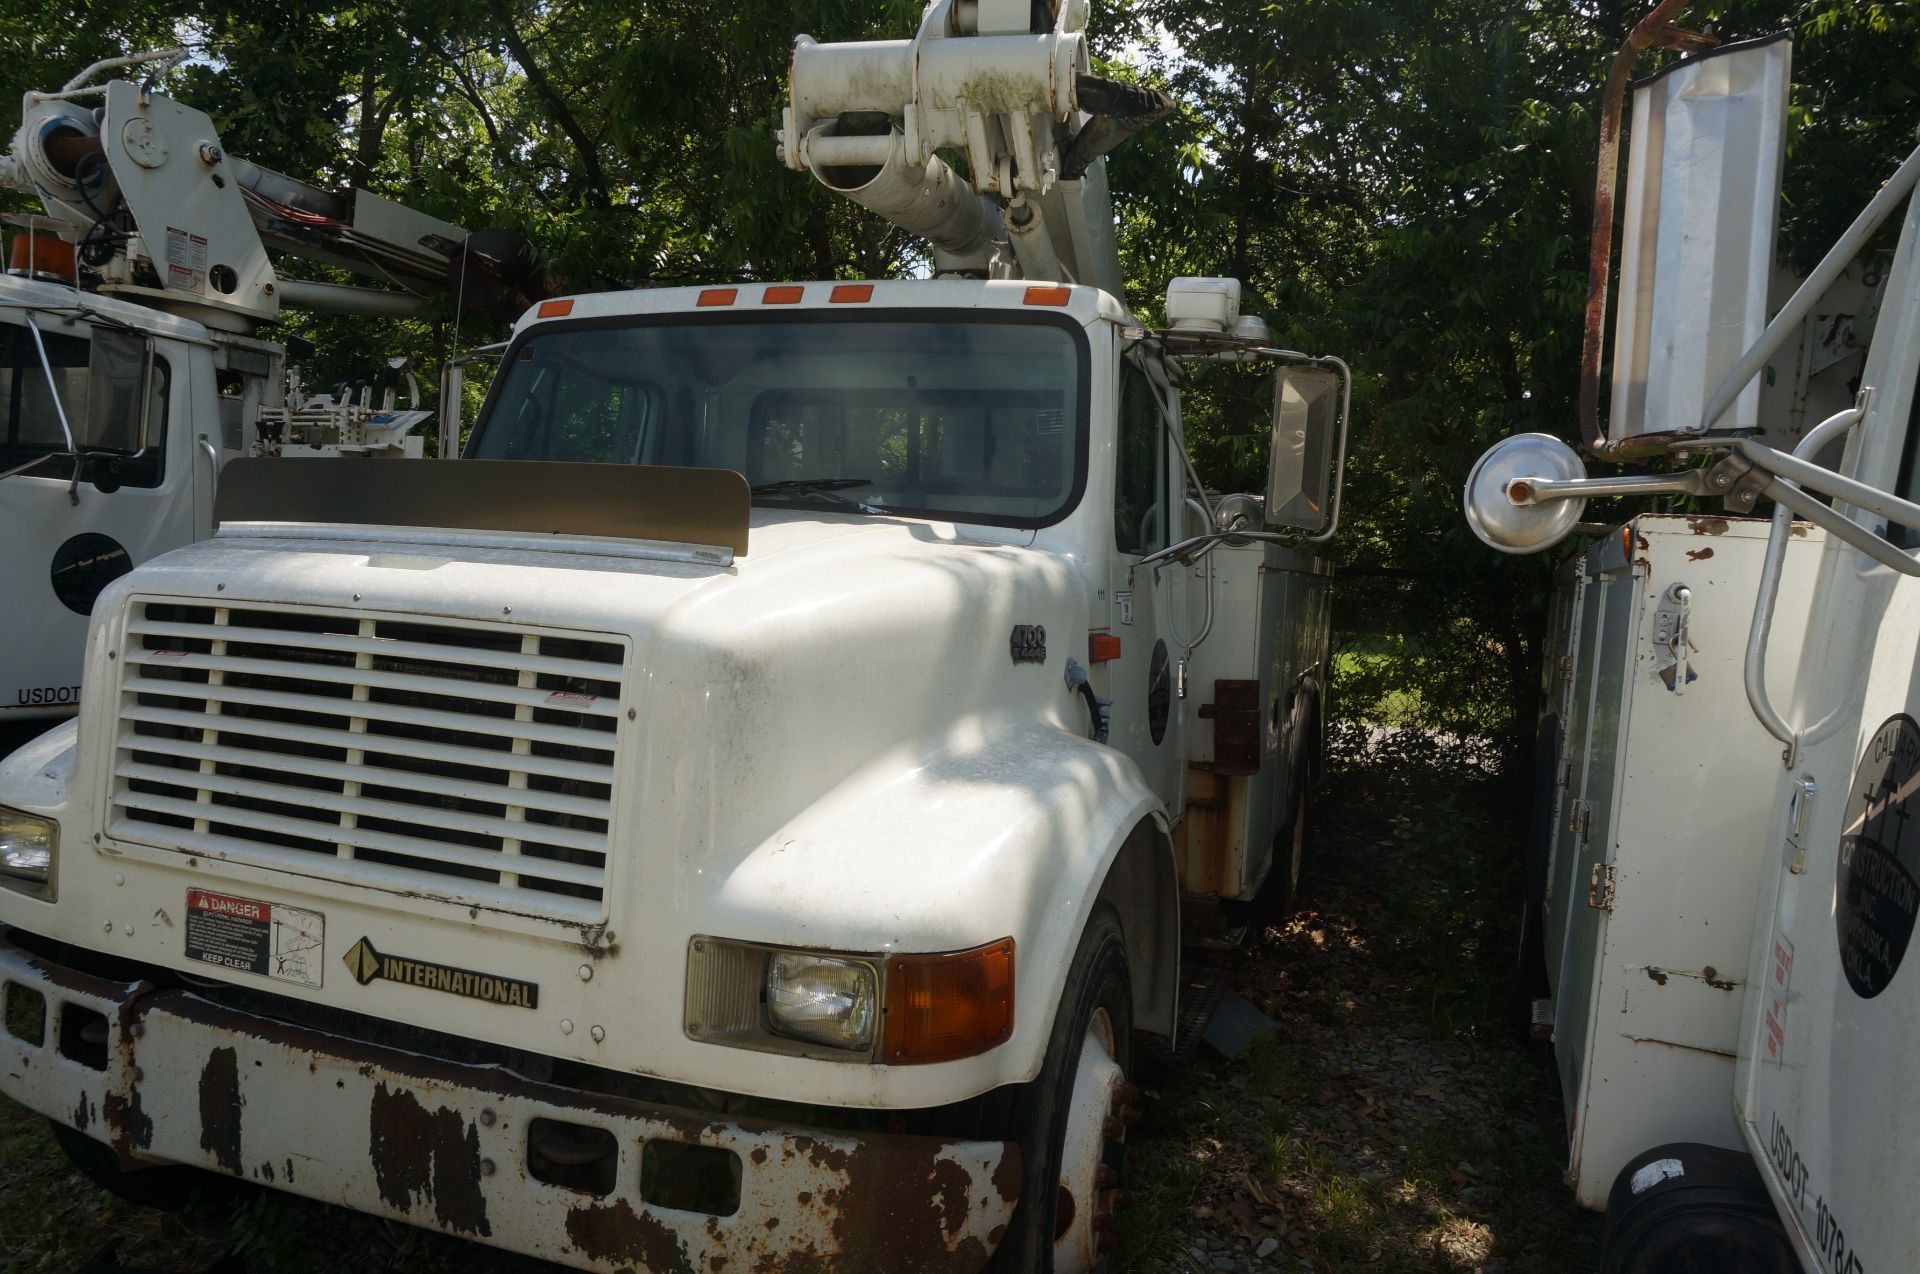 #111 1999 International 4700 T444E Diesel Truck, Automatic, Service Bed, 40’ Altec 1A40 Bucket - Image 2 of 2